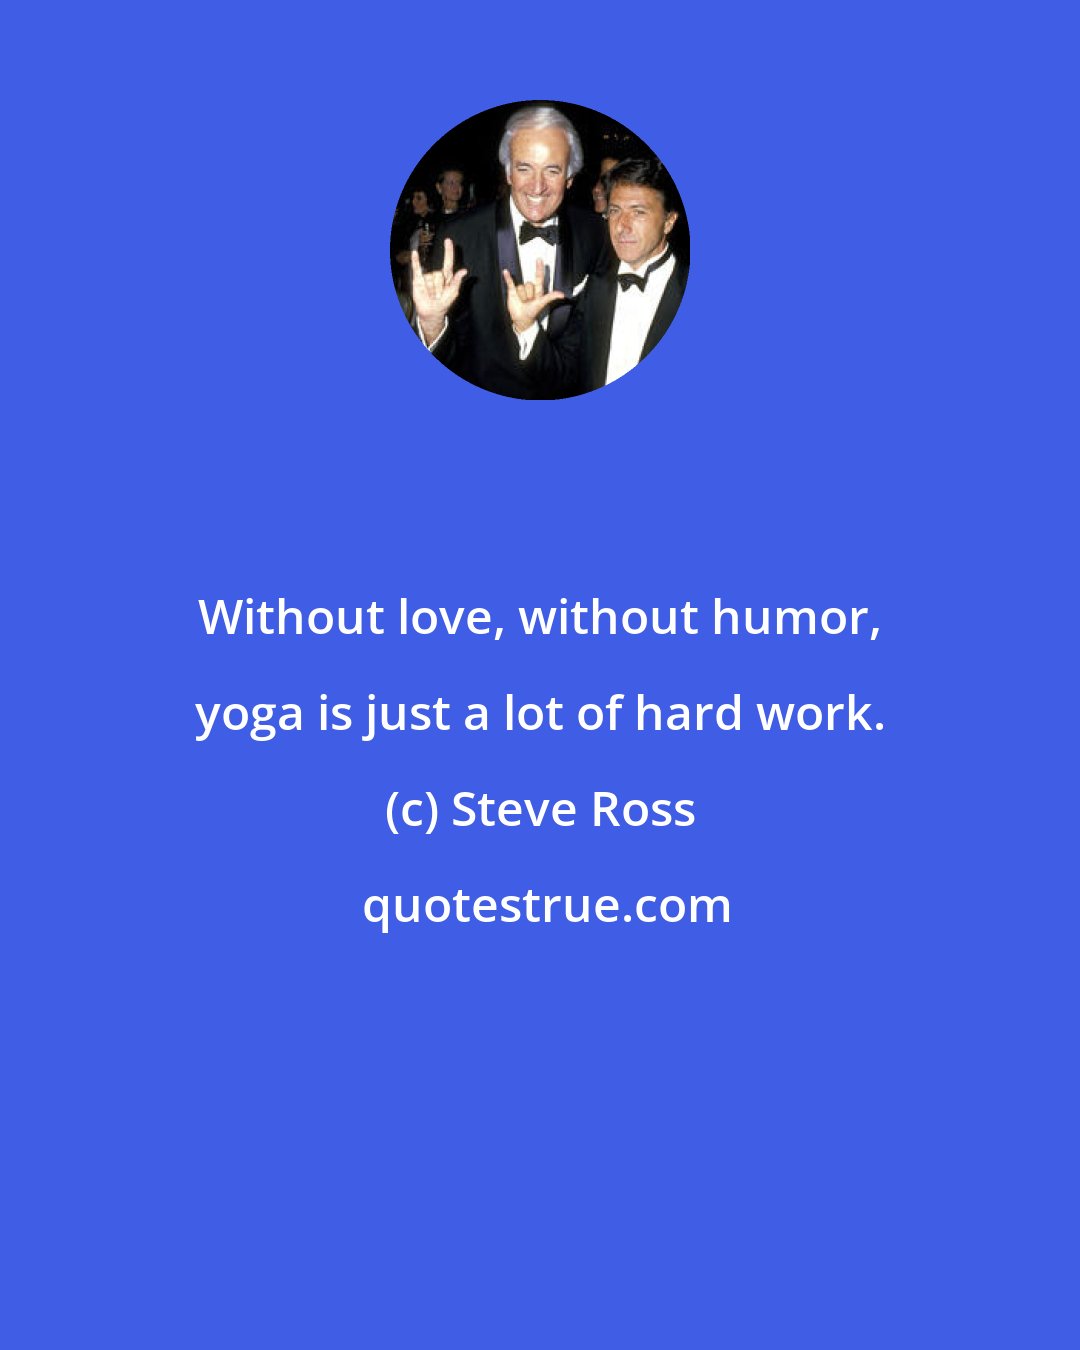 Steve Ross: Without love, without humor, yoga is just a lot of hard work.